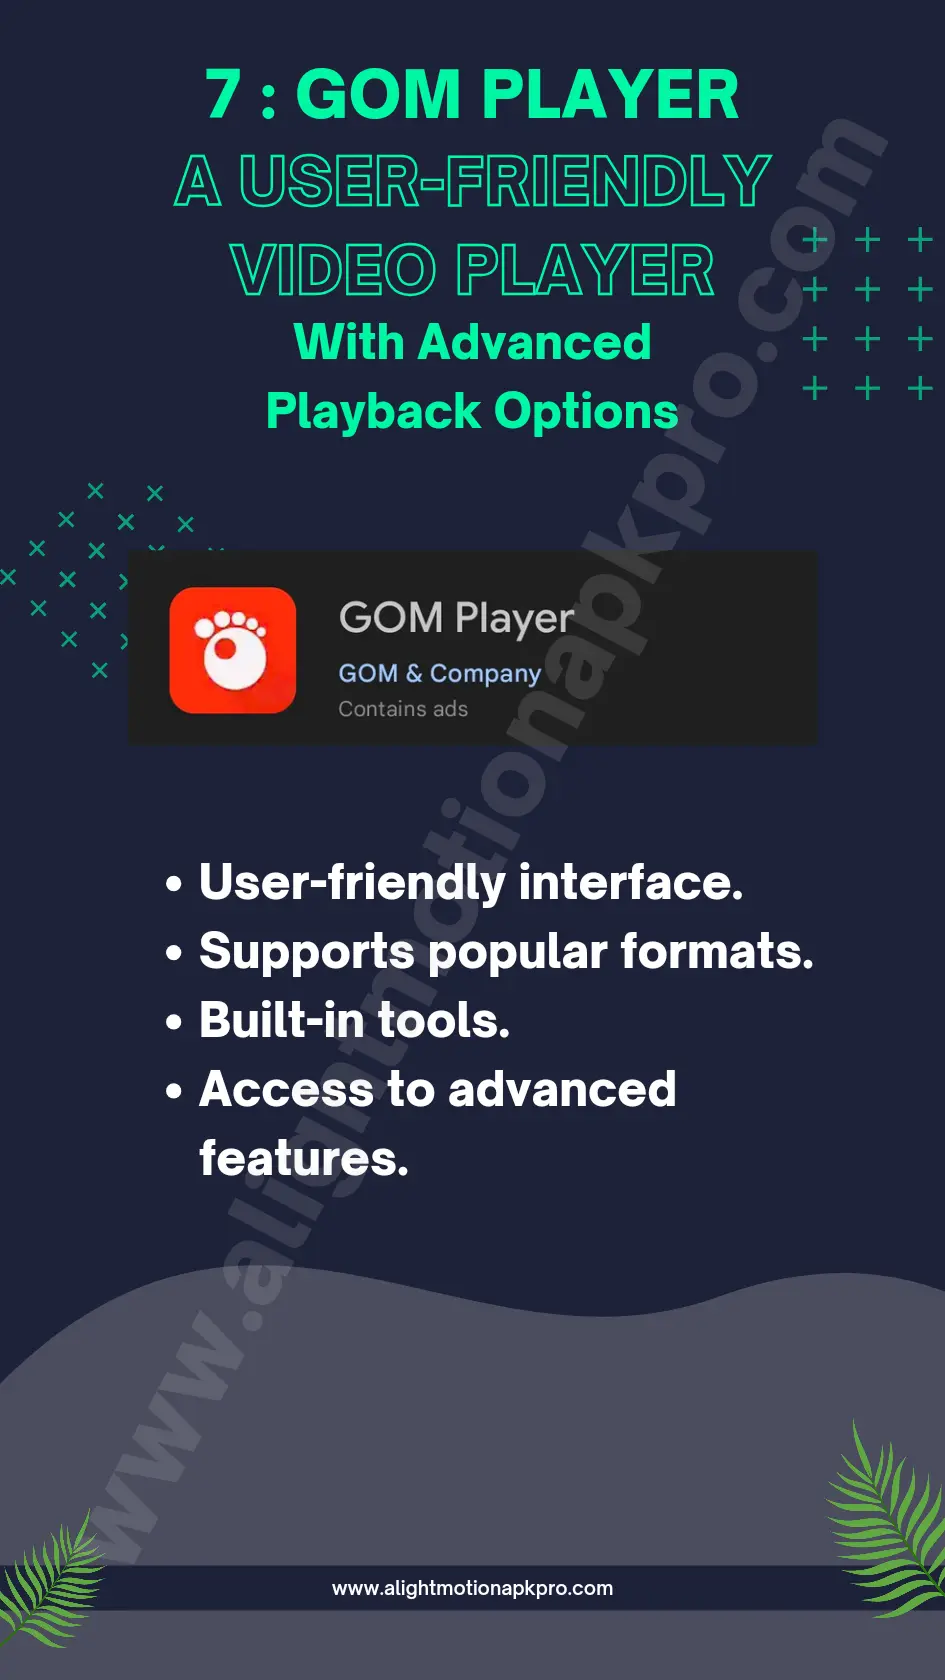 GOM Player A User-Friendly Video Player with Advanced Playback Options Without Ads